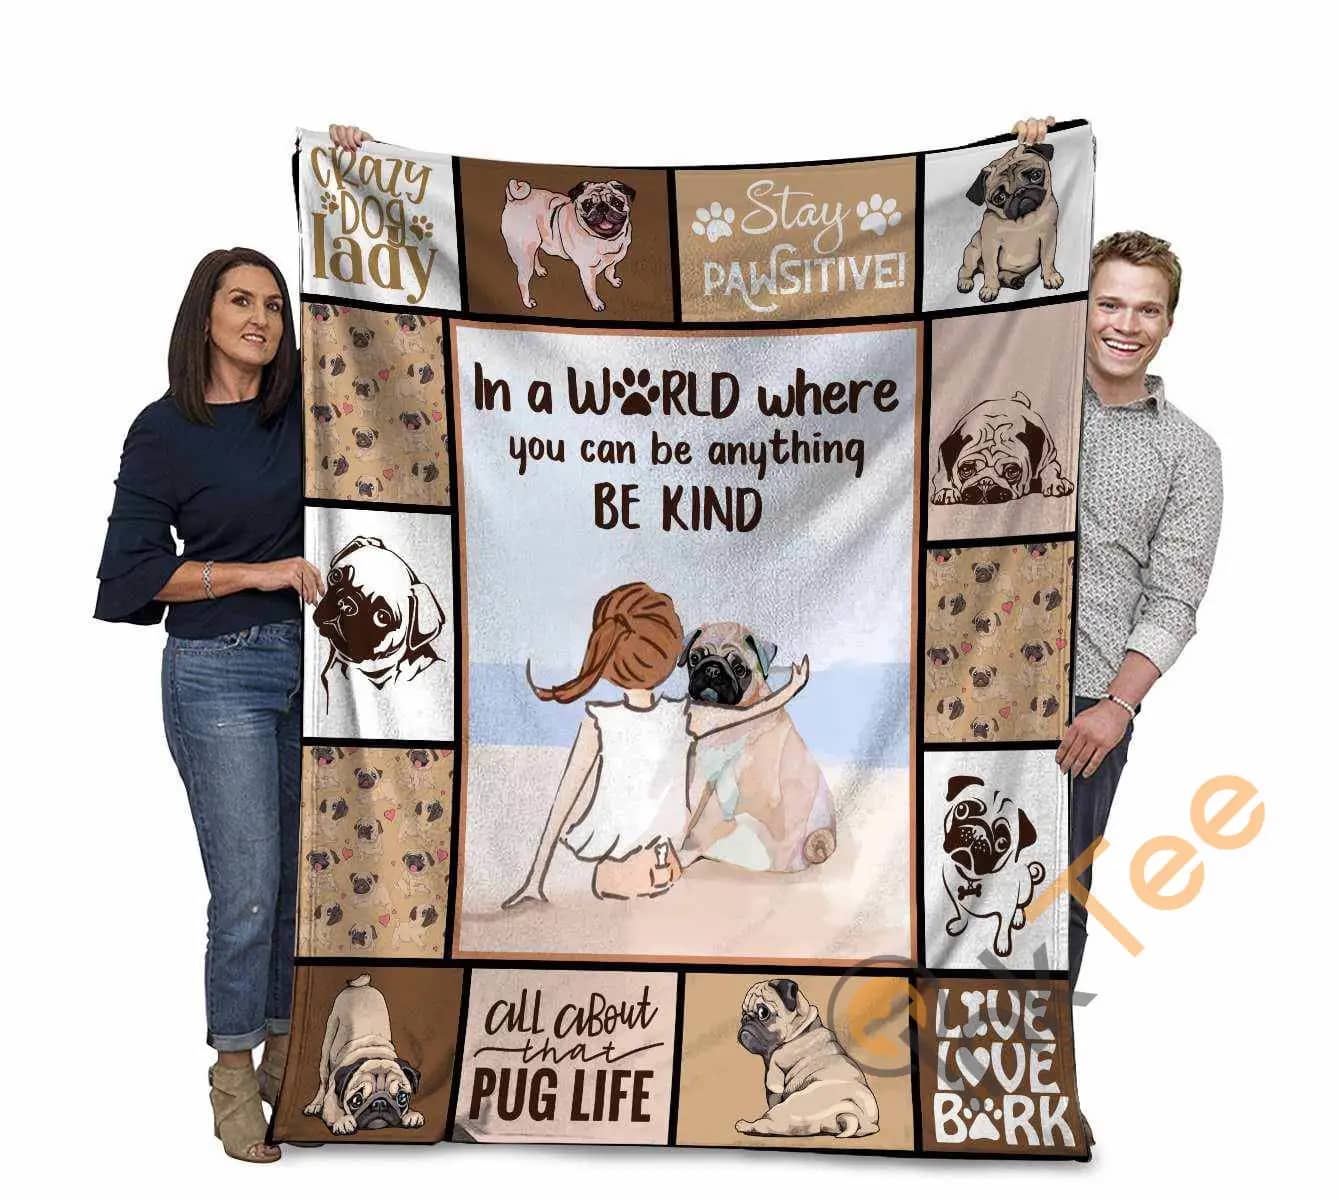 Pug In A World Where You Can Be Anything Be Kind Ultra Soft Cozy Plush Fleece Blanket